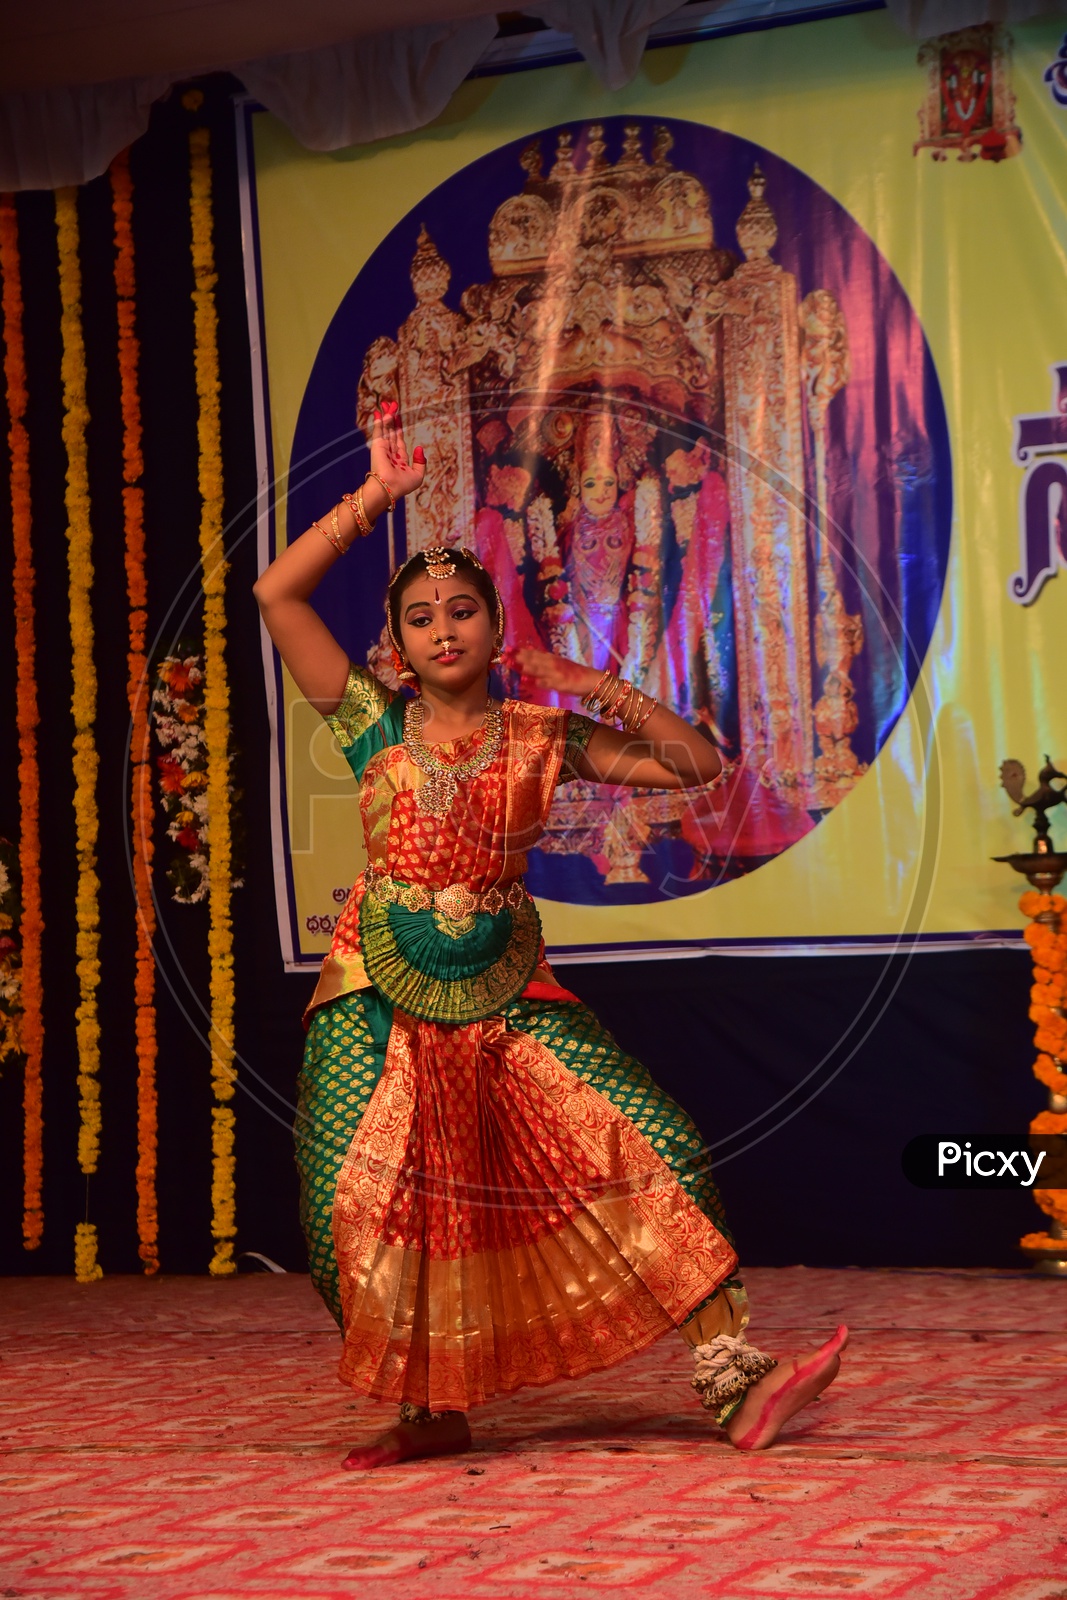 Artist performing Indian Classical Dance Kuchipudi on Stage